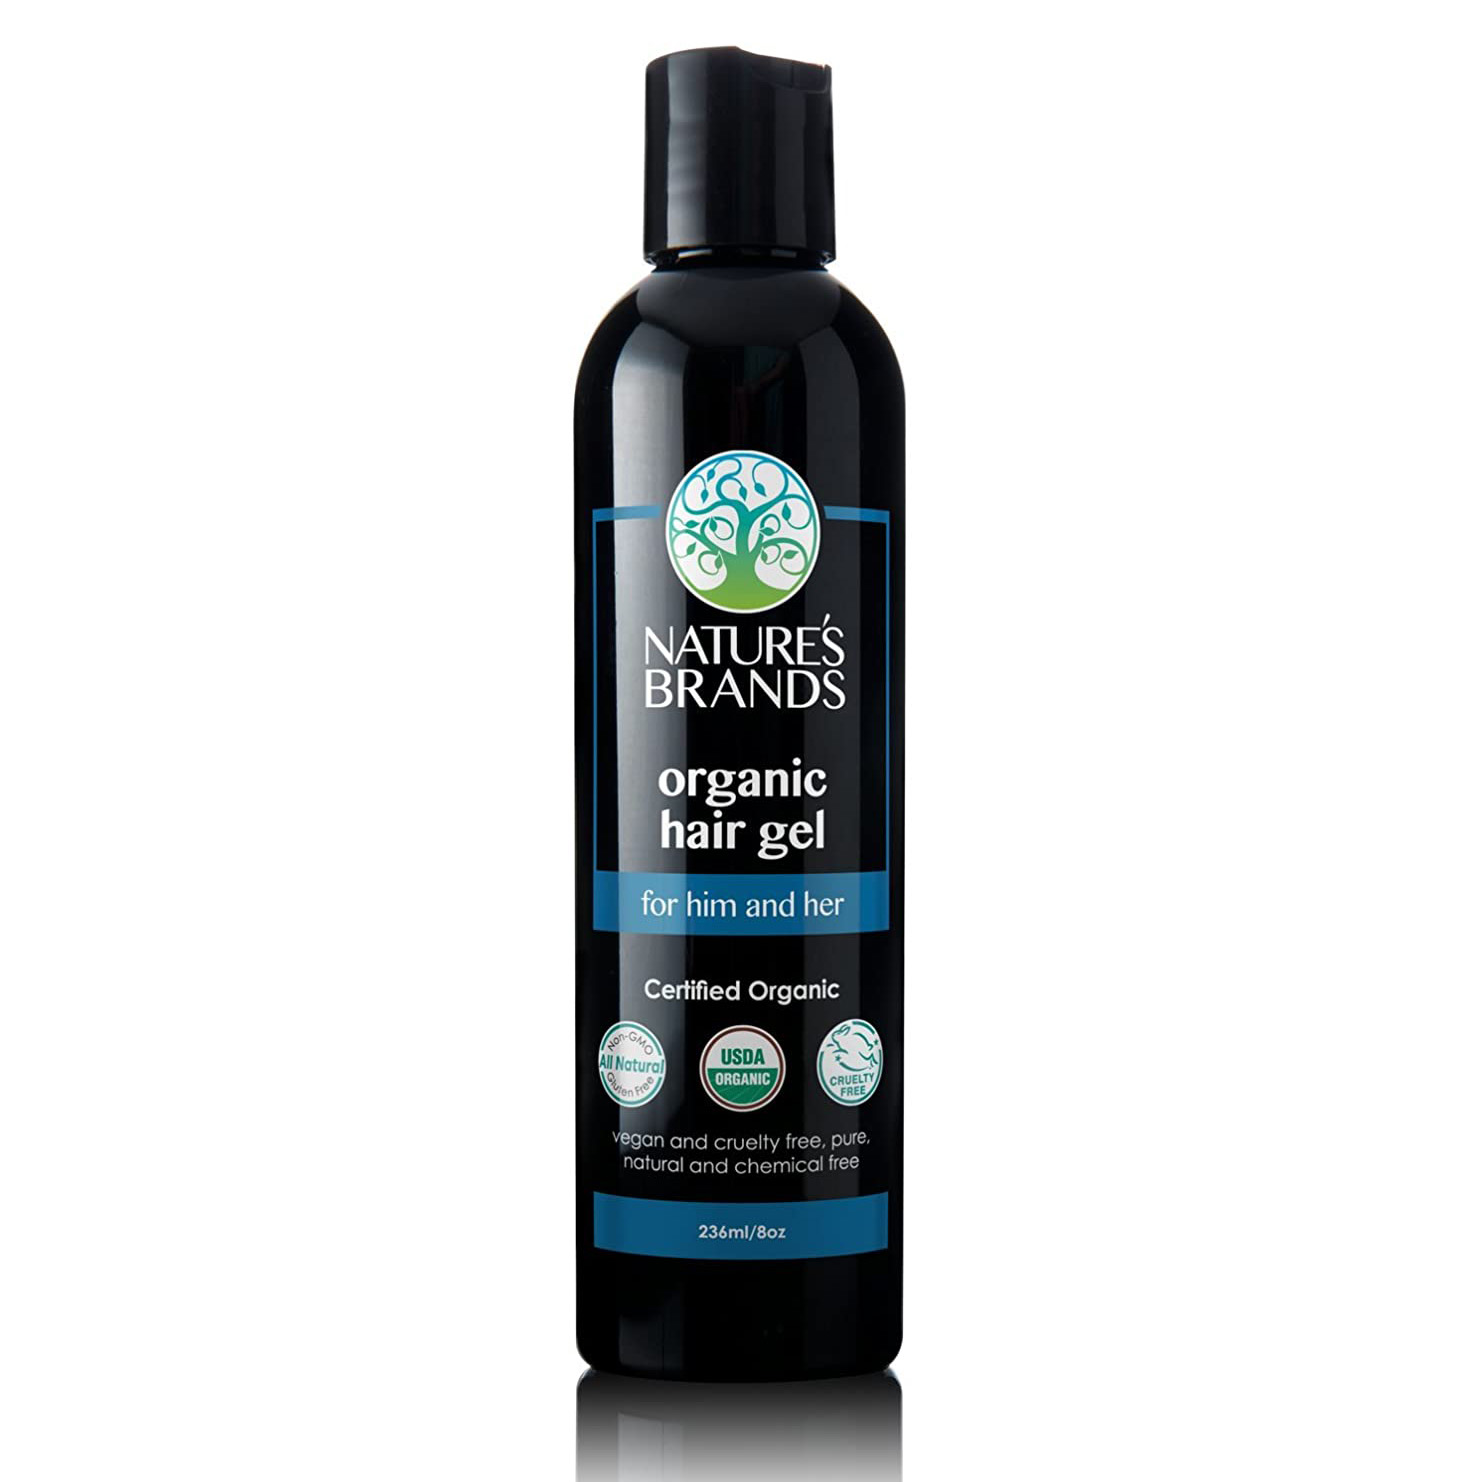 5 Sustainable Hair Products To Try - Eco-Friendly Natural Hair  BrandsHelloGiggles